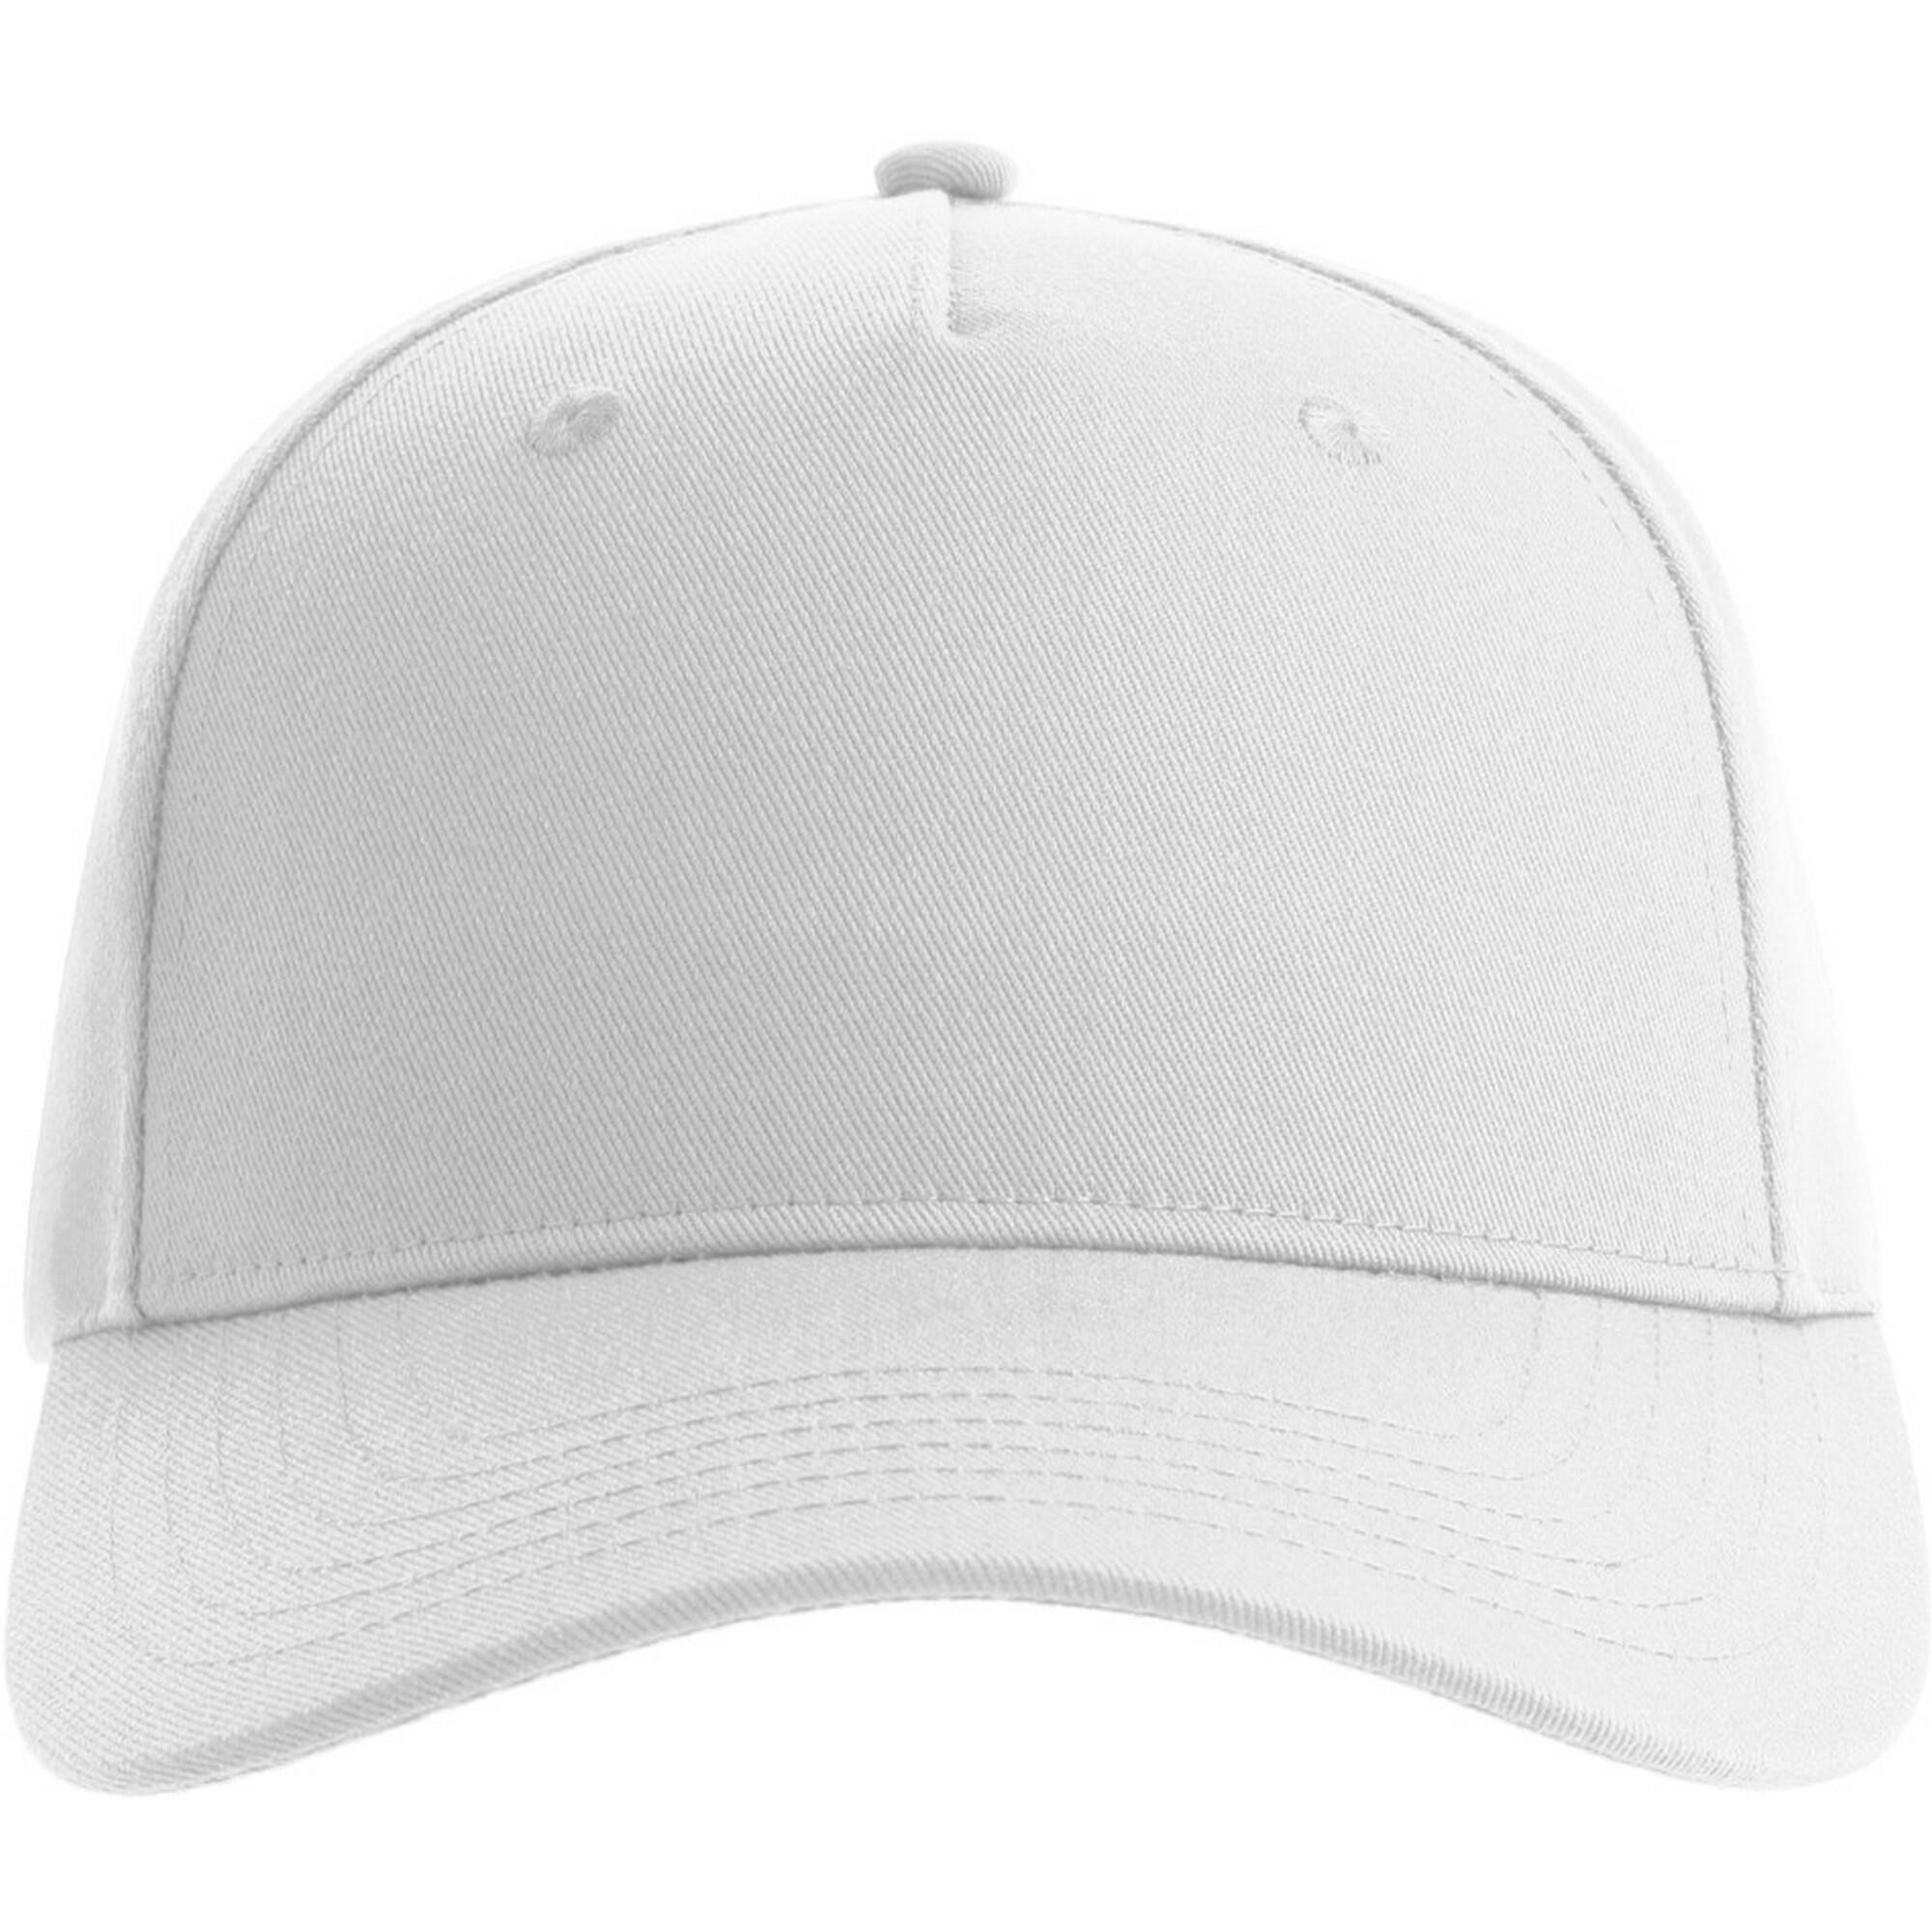 Unisex Adult Fiji Recycled Polyester Cap (White) 2/3